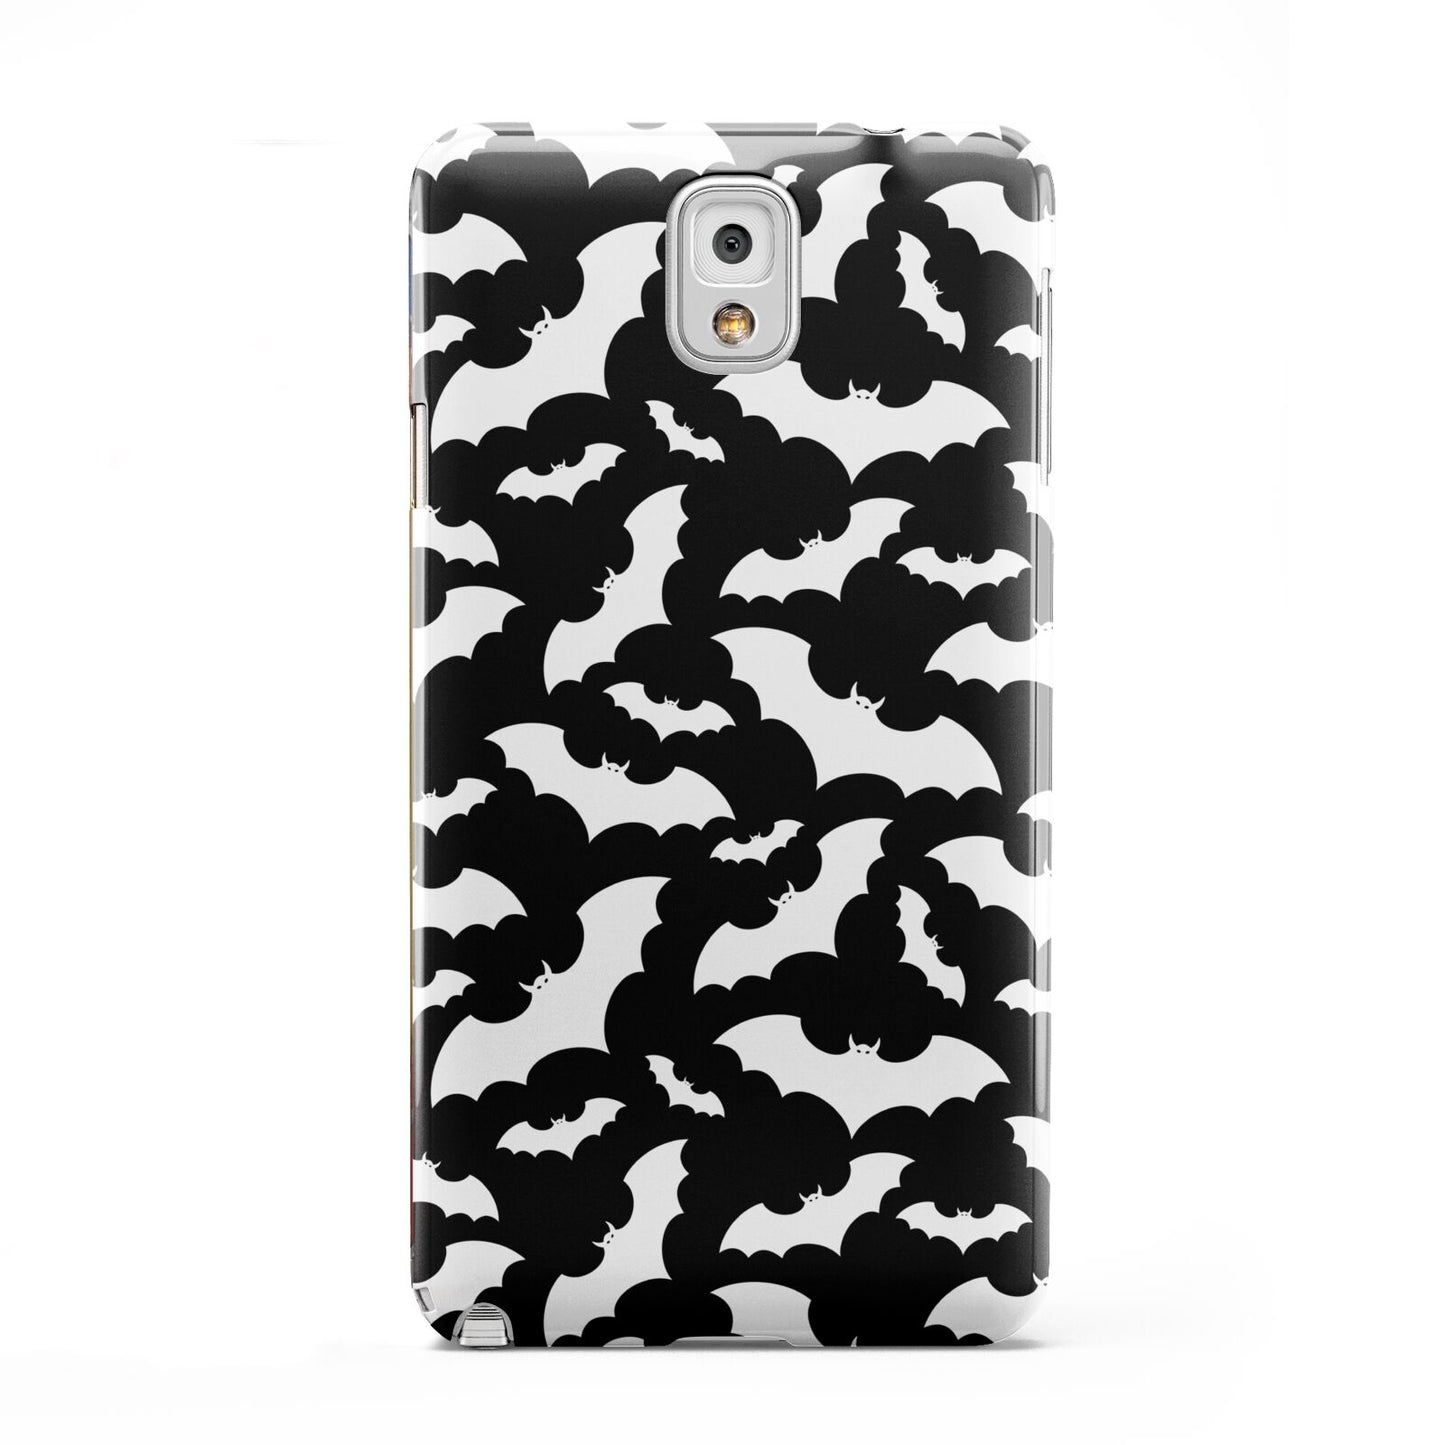 Black and White Bats Samsung Galaxy Note 3 Case